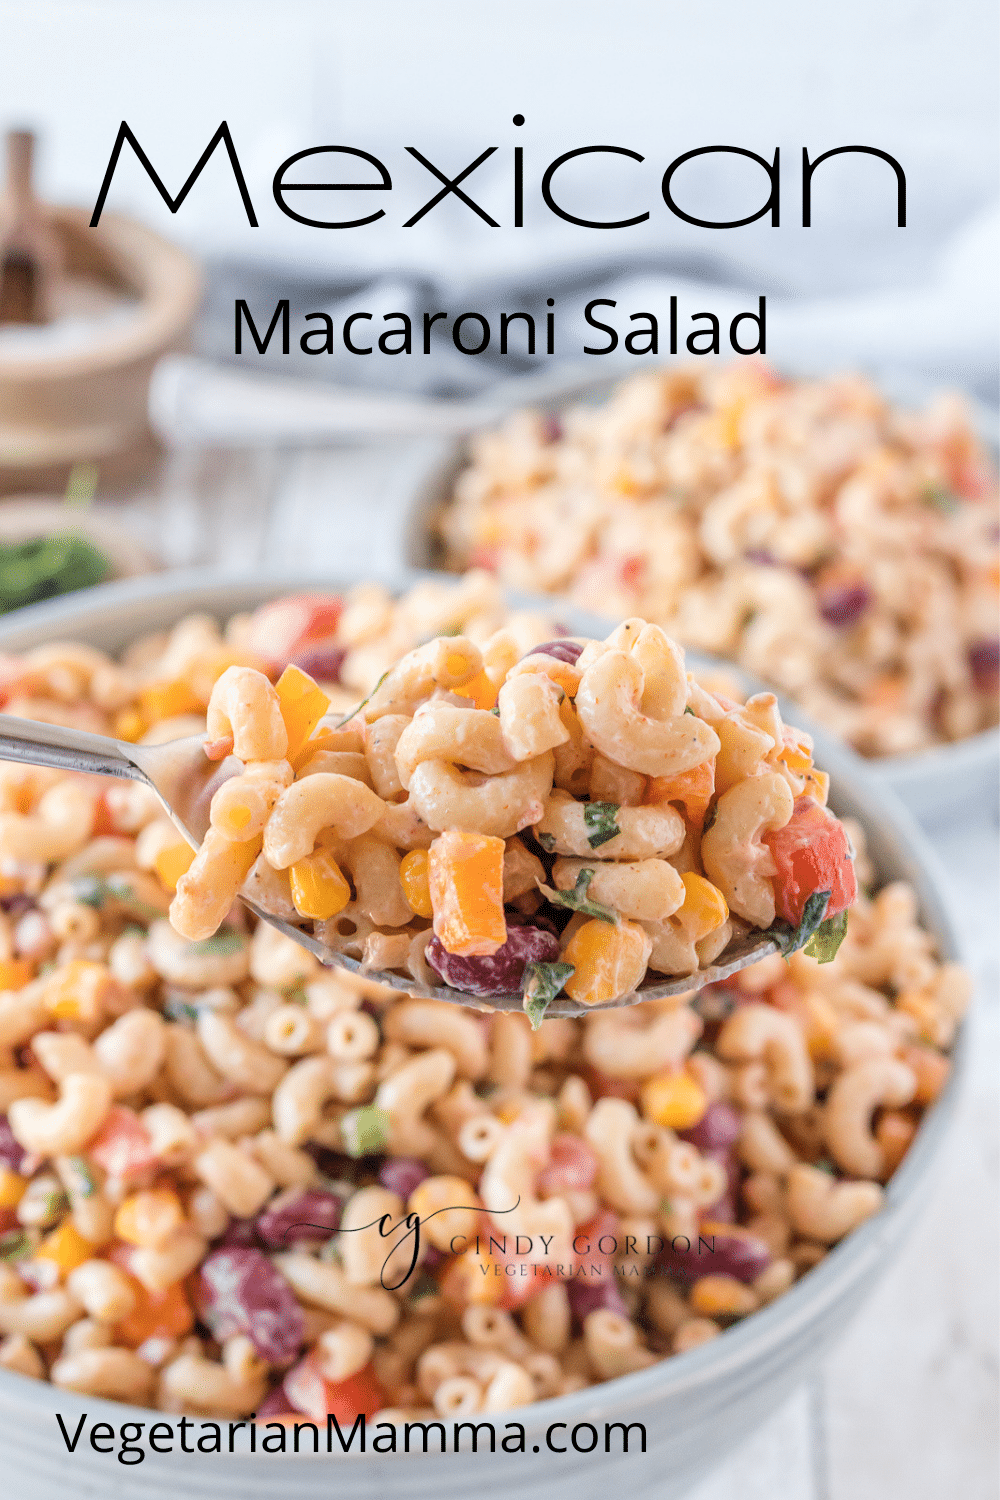 Mexican Macaroni Salad is a crowd pleaser! You will love the crunch and the creaminess this macaroni salad brings to the table! This Mexican Macaroni Salad is packed with colorful and flavorful veggies. | Macaroni Salad | Mexican Recipe